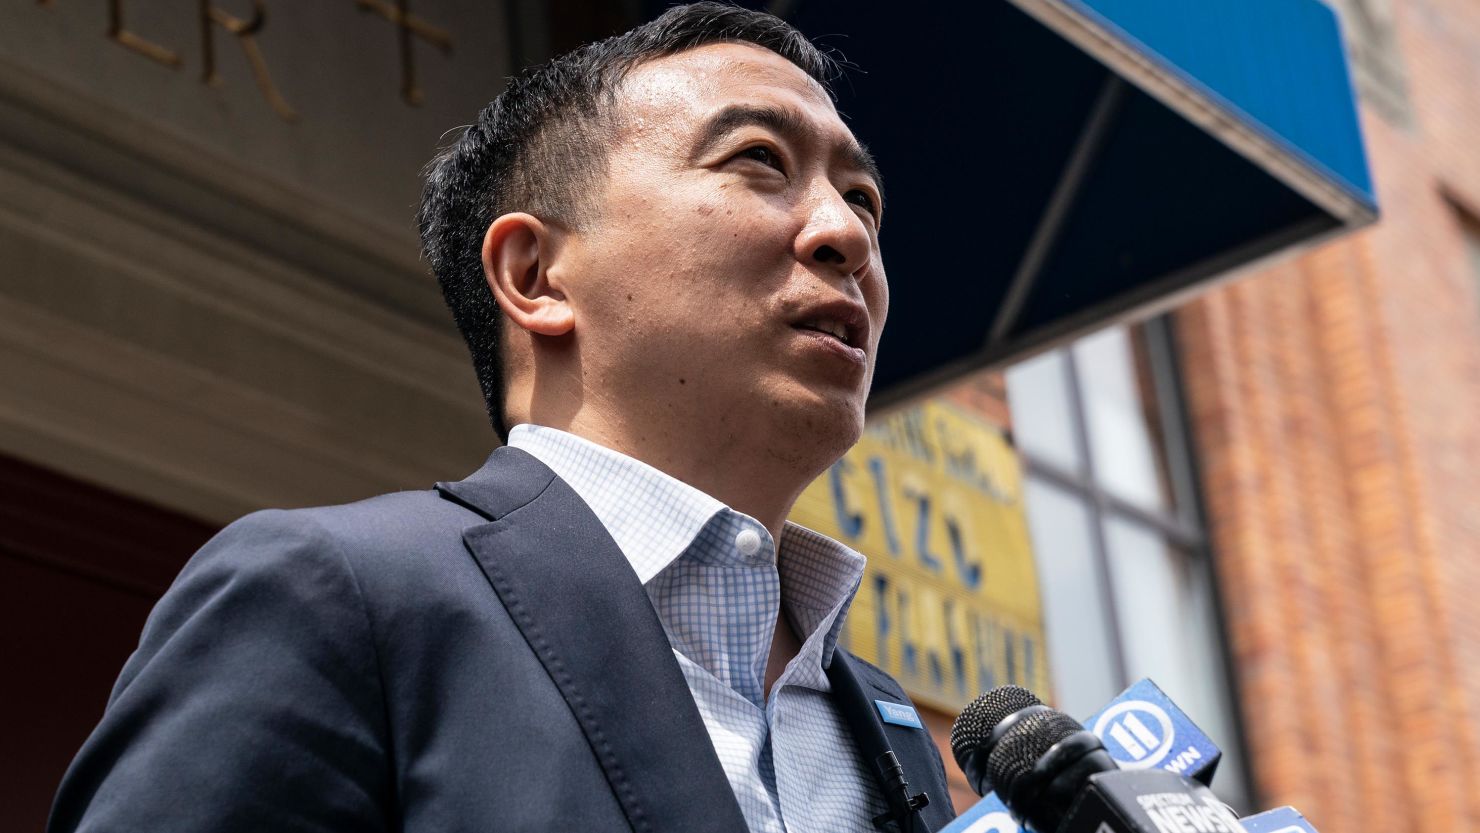 13 NYC mayoral candidate andrew yang